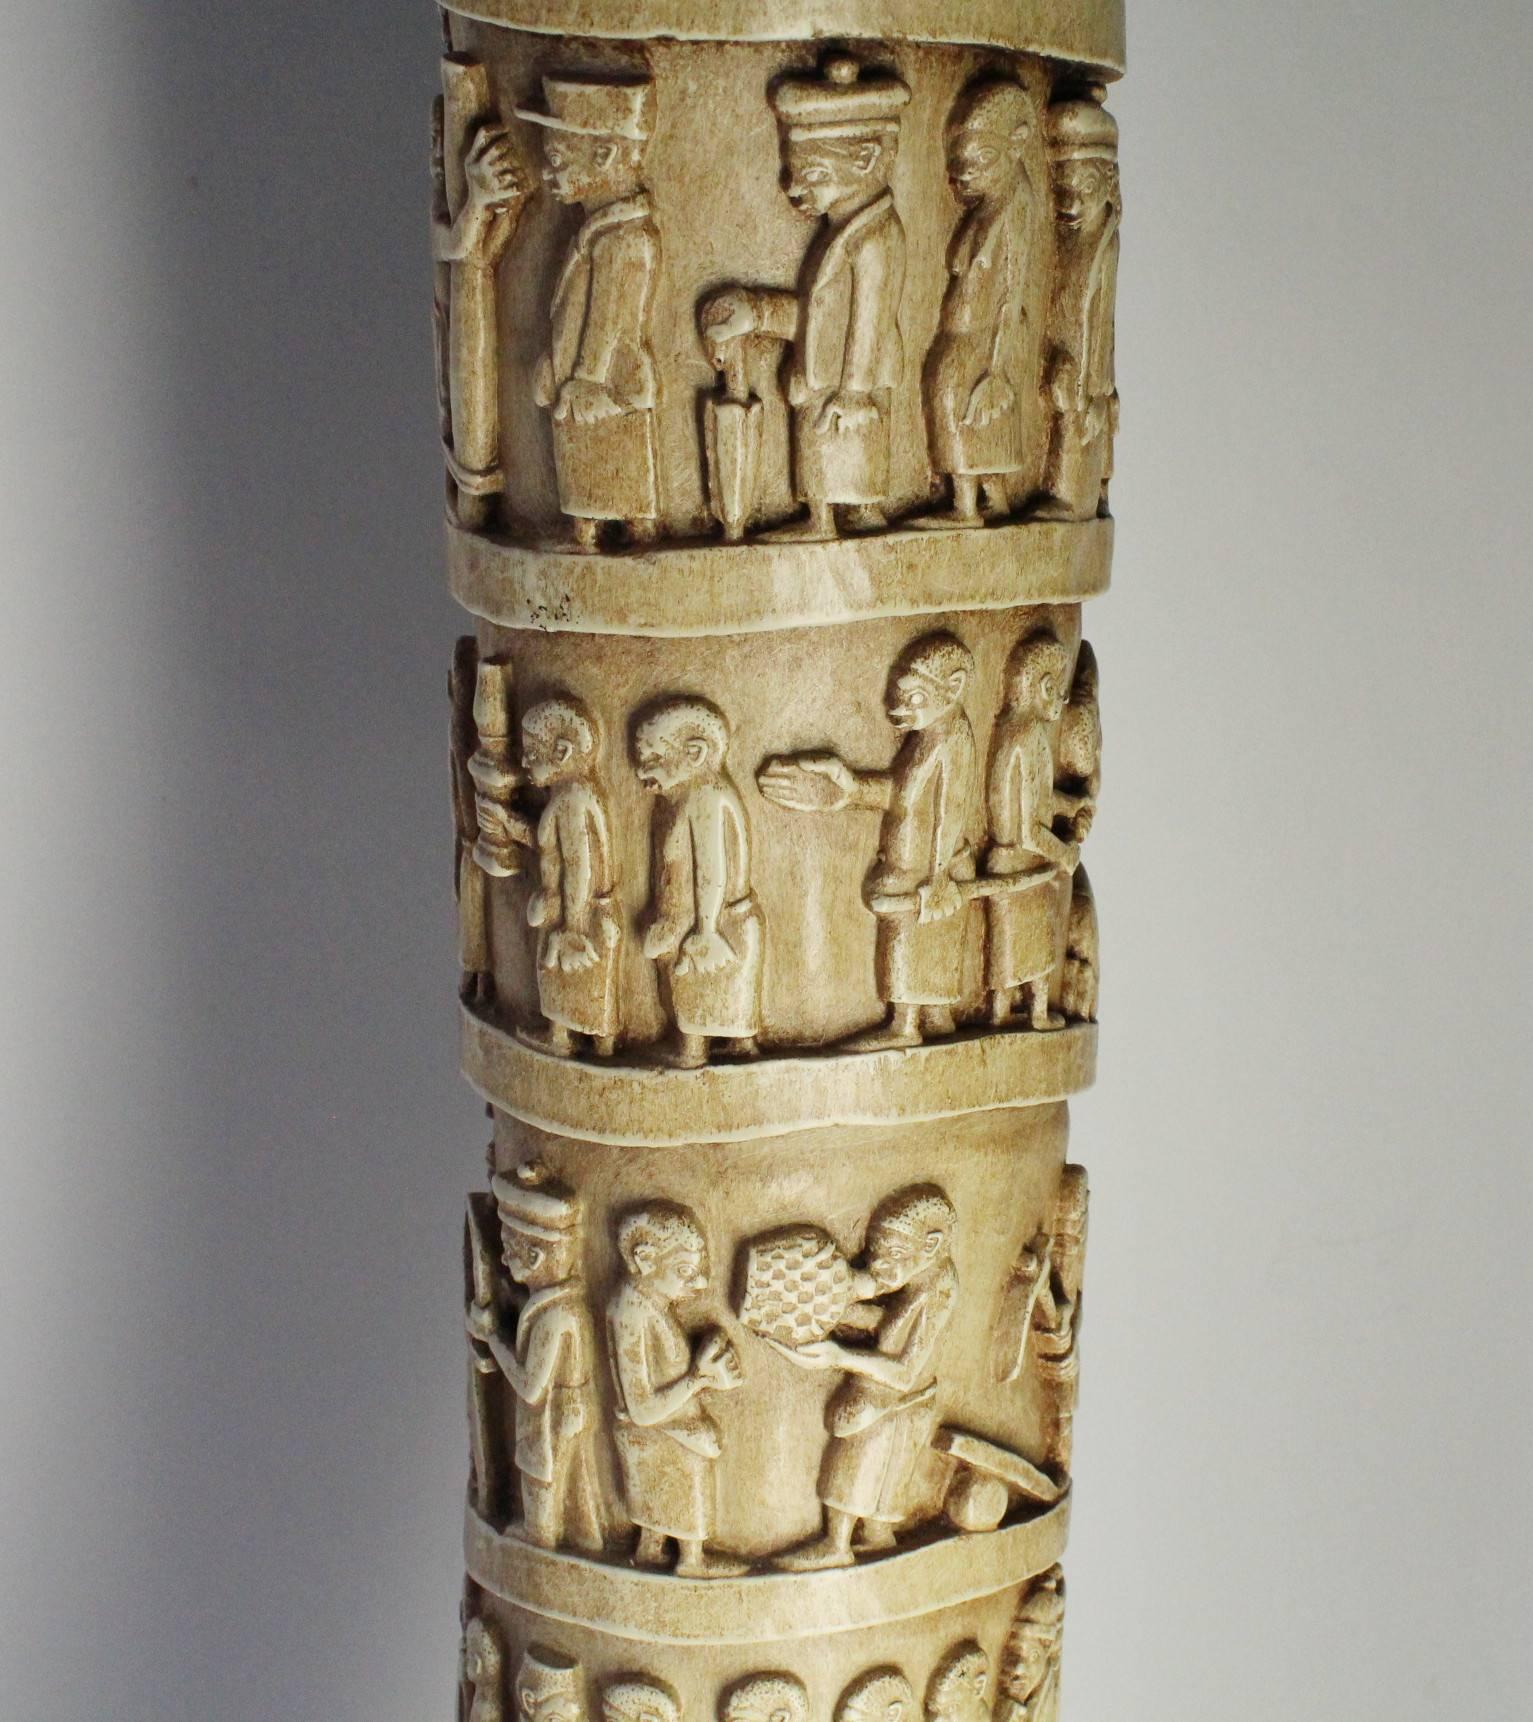 Molded Carved Tusk Shaped Sculptures in Plaster by Austin, 1986